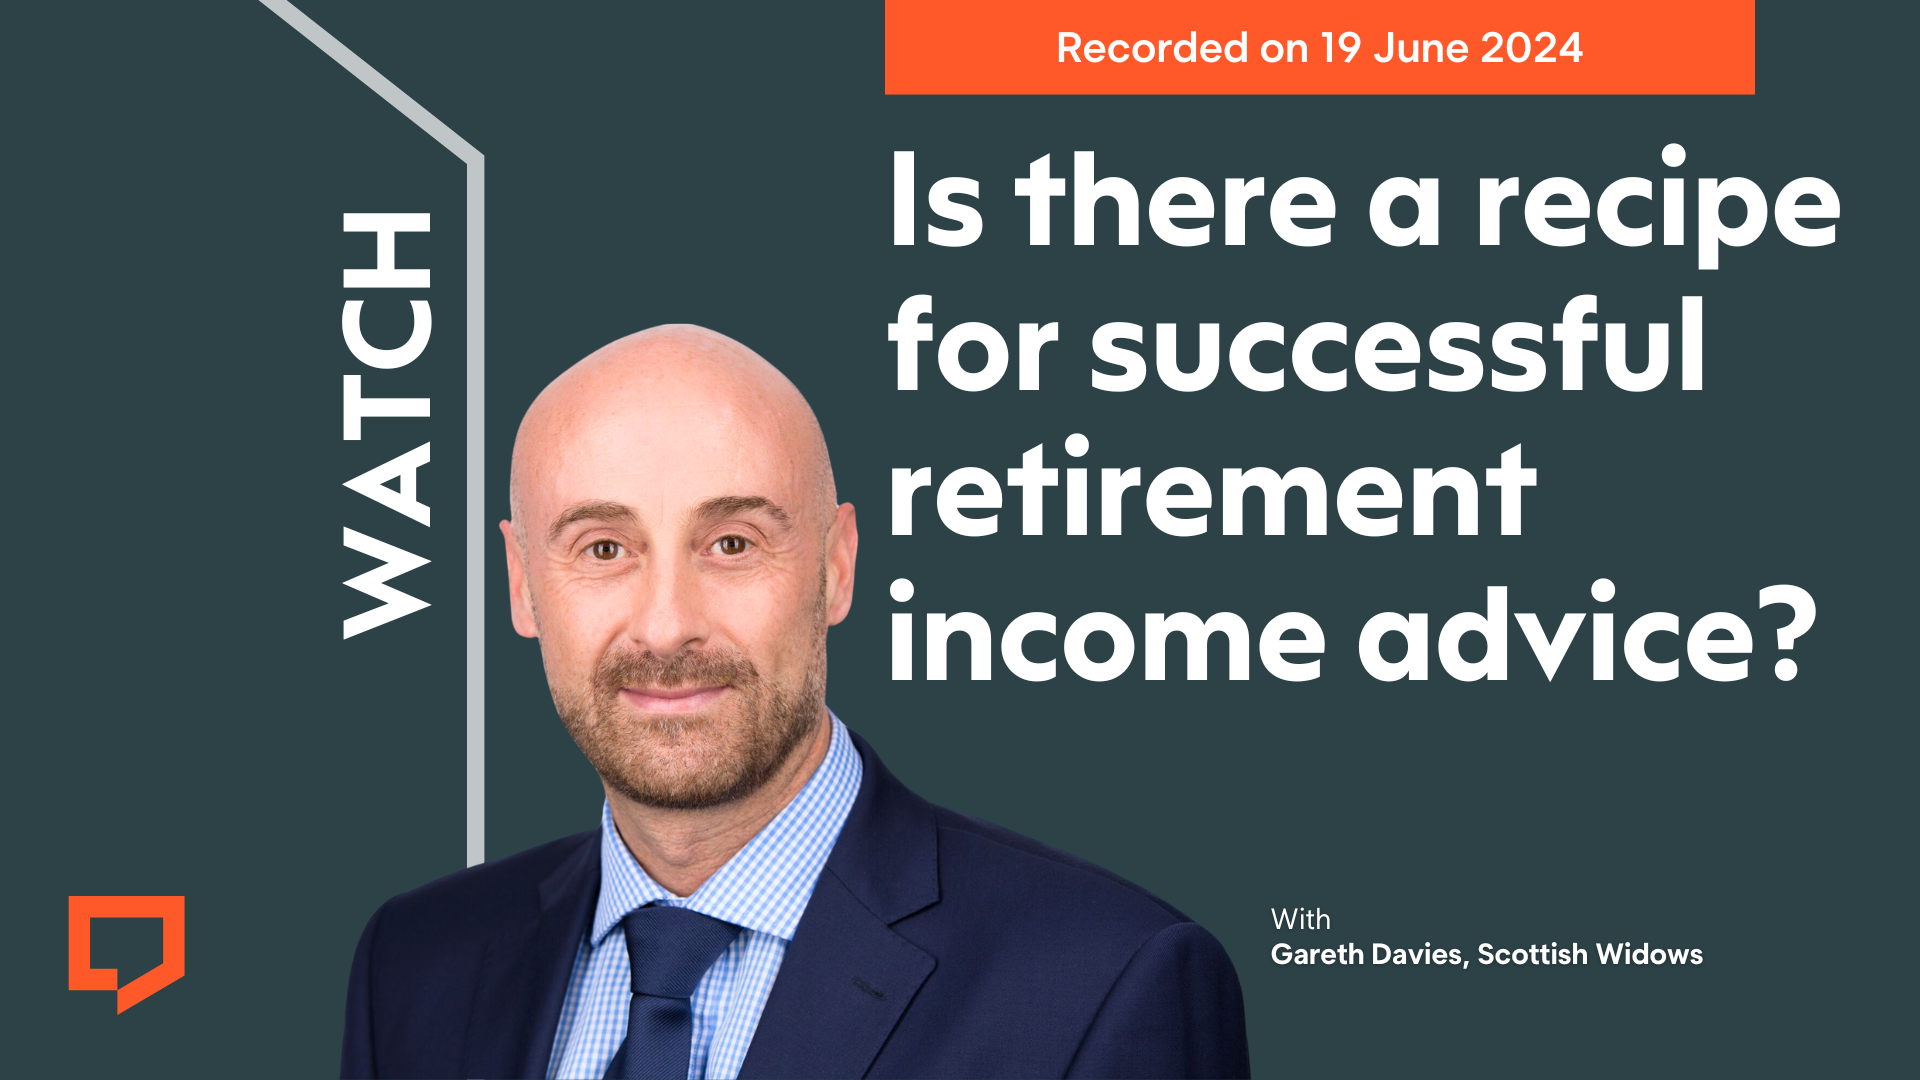 Watch 'Is there a recipe for successful retirement income advice?' with Gareth Davies of Scottish Widows. Recorded on 19 June 2024.